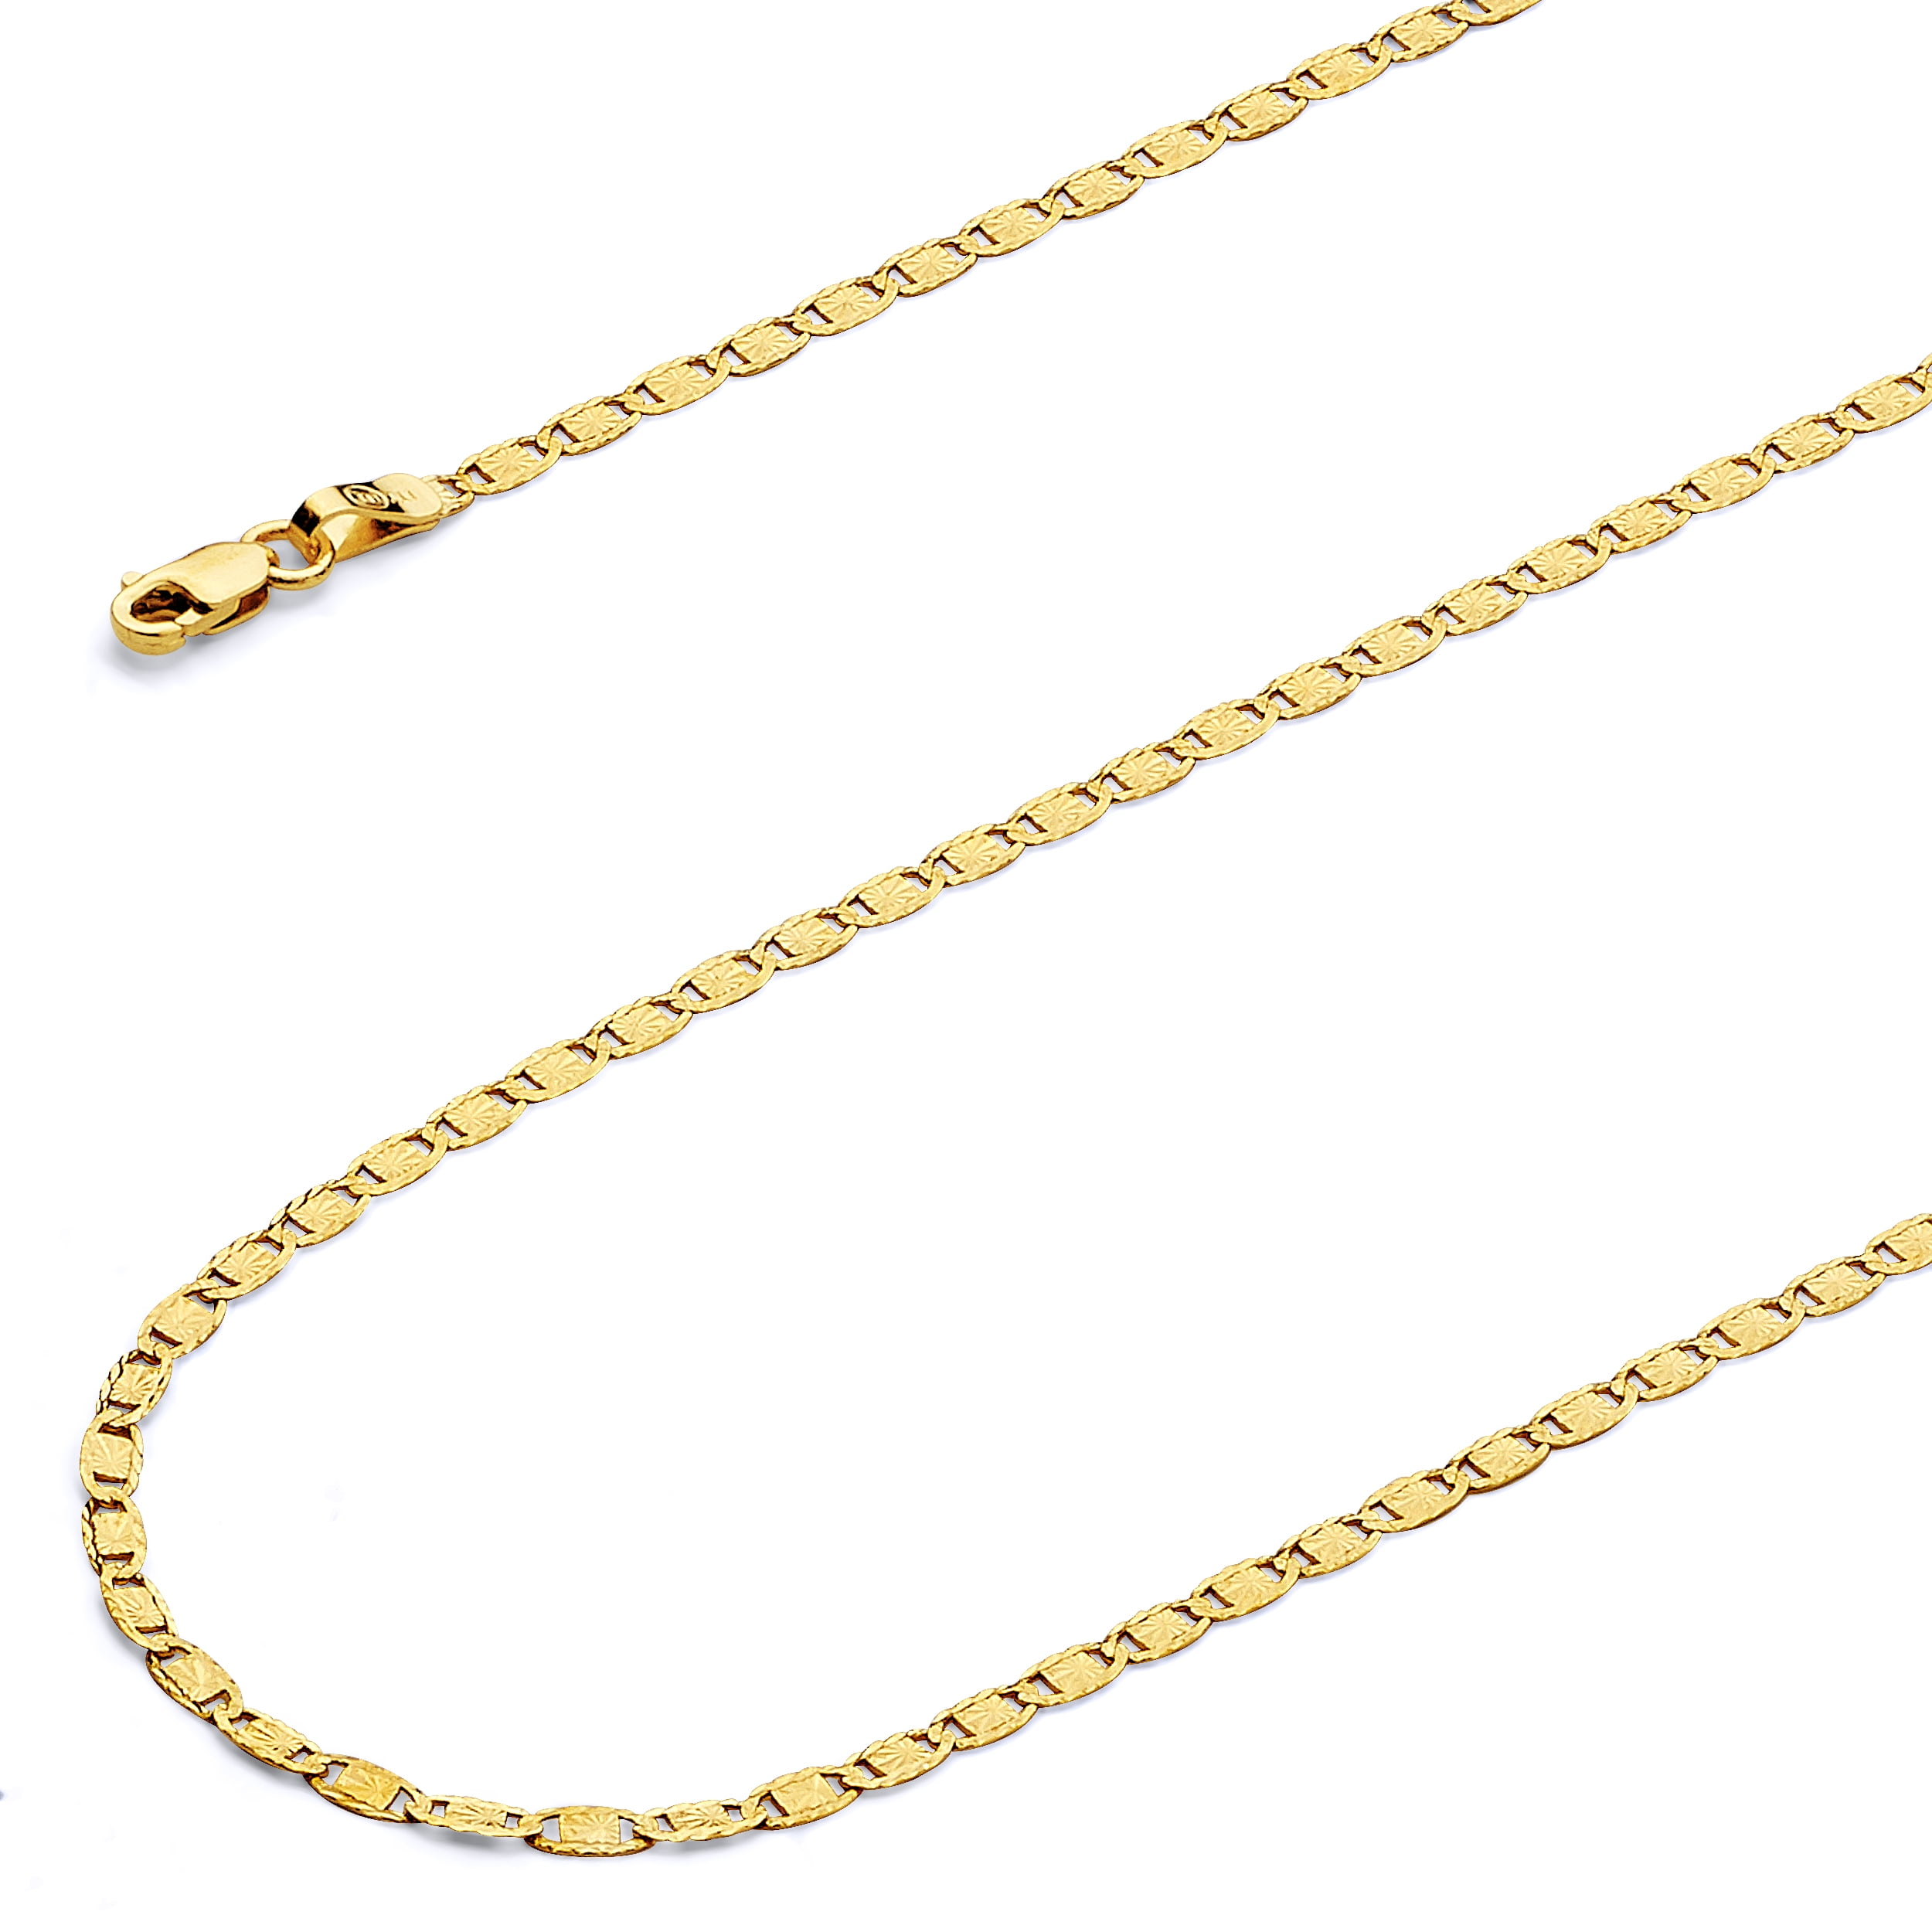 Solid Gold Hollow French Rope Light Chain Necklace 14K Yellow Gold 2mm Wide Lengths 16 to 24